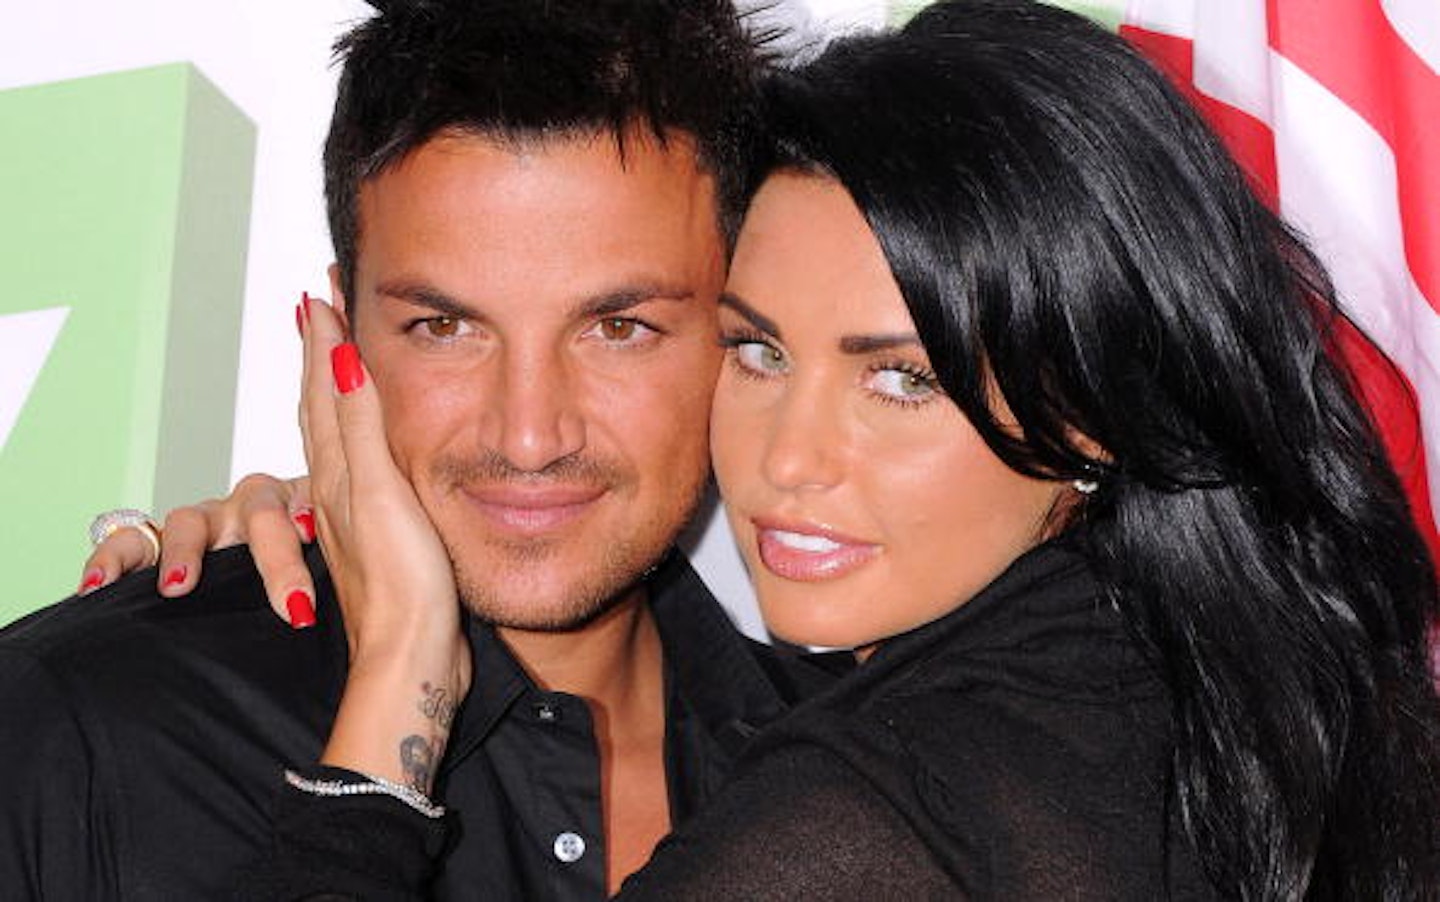 Peter Andre and Katie Price